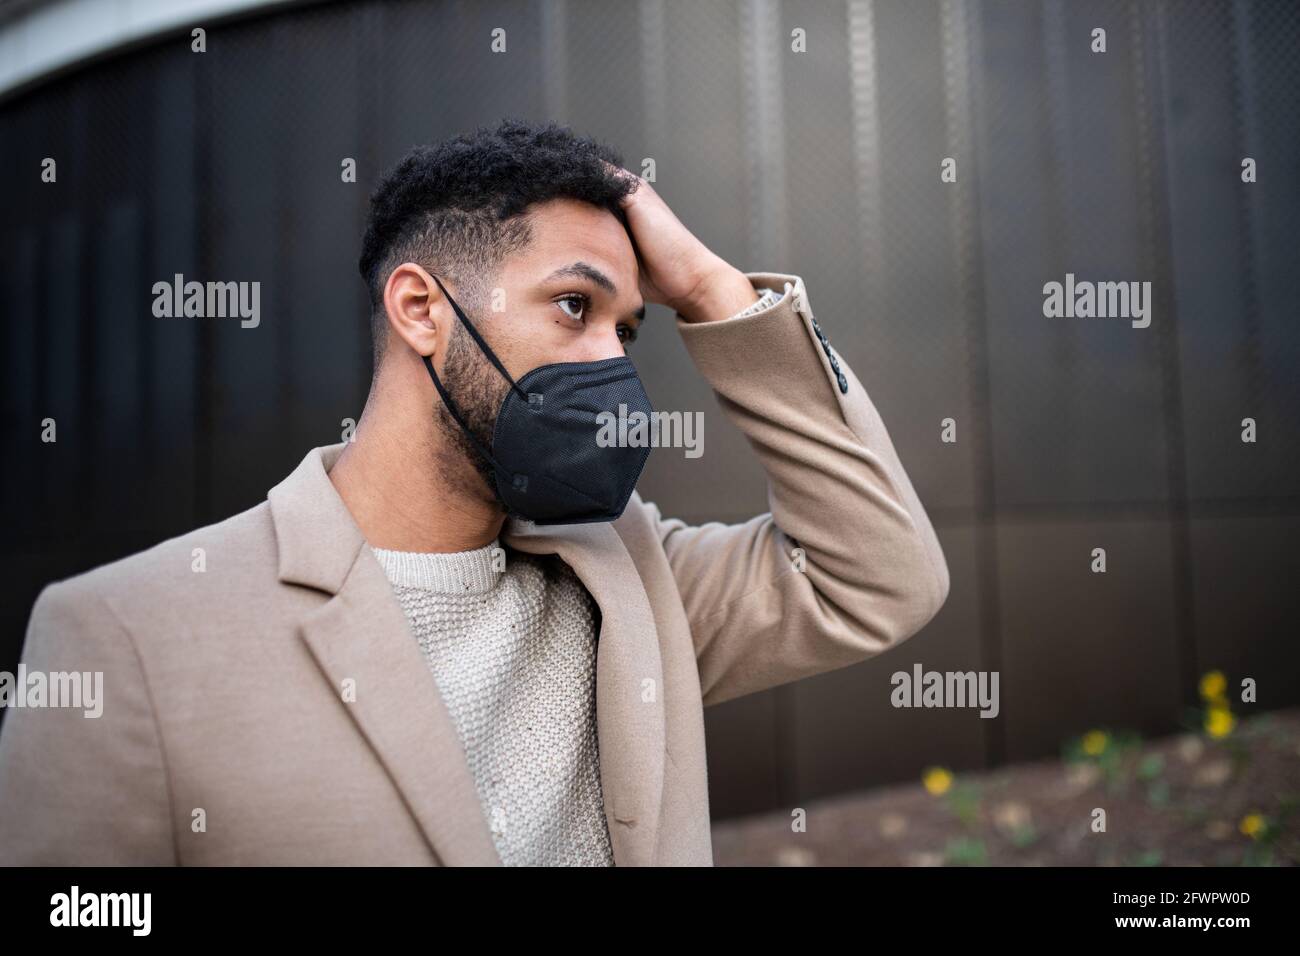 Portrait of man on the way to work outdoors in city, coronavirus concept. Stock Photo